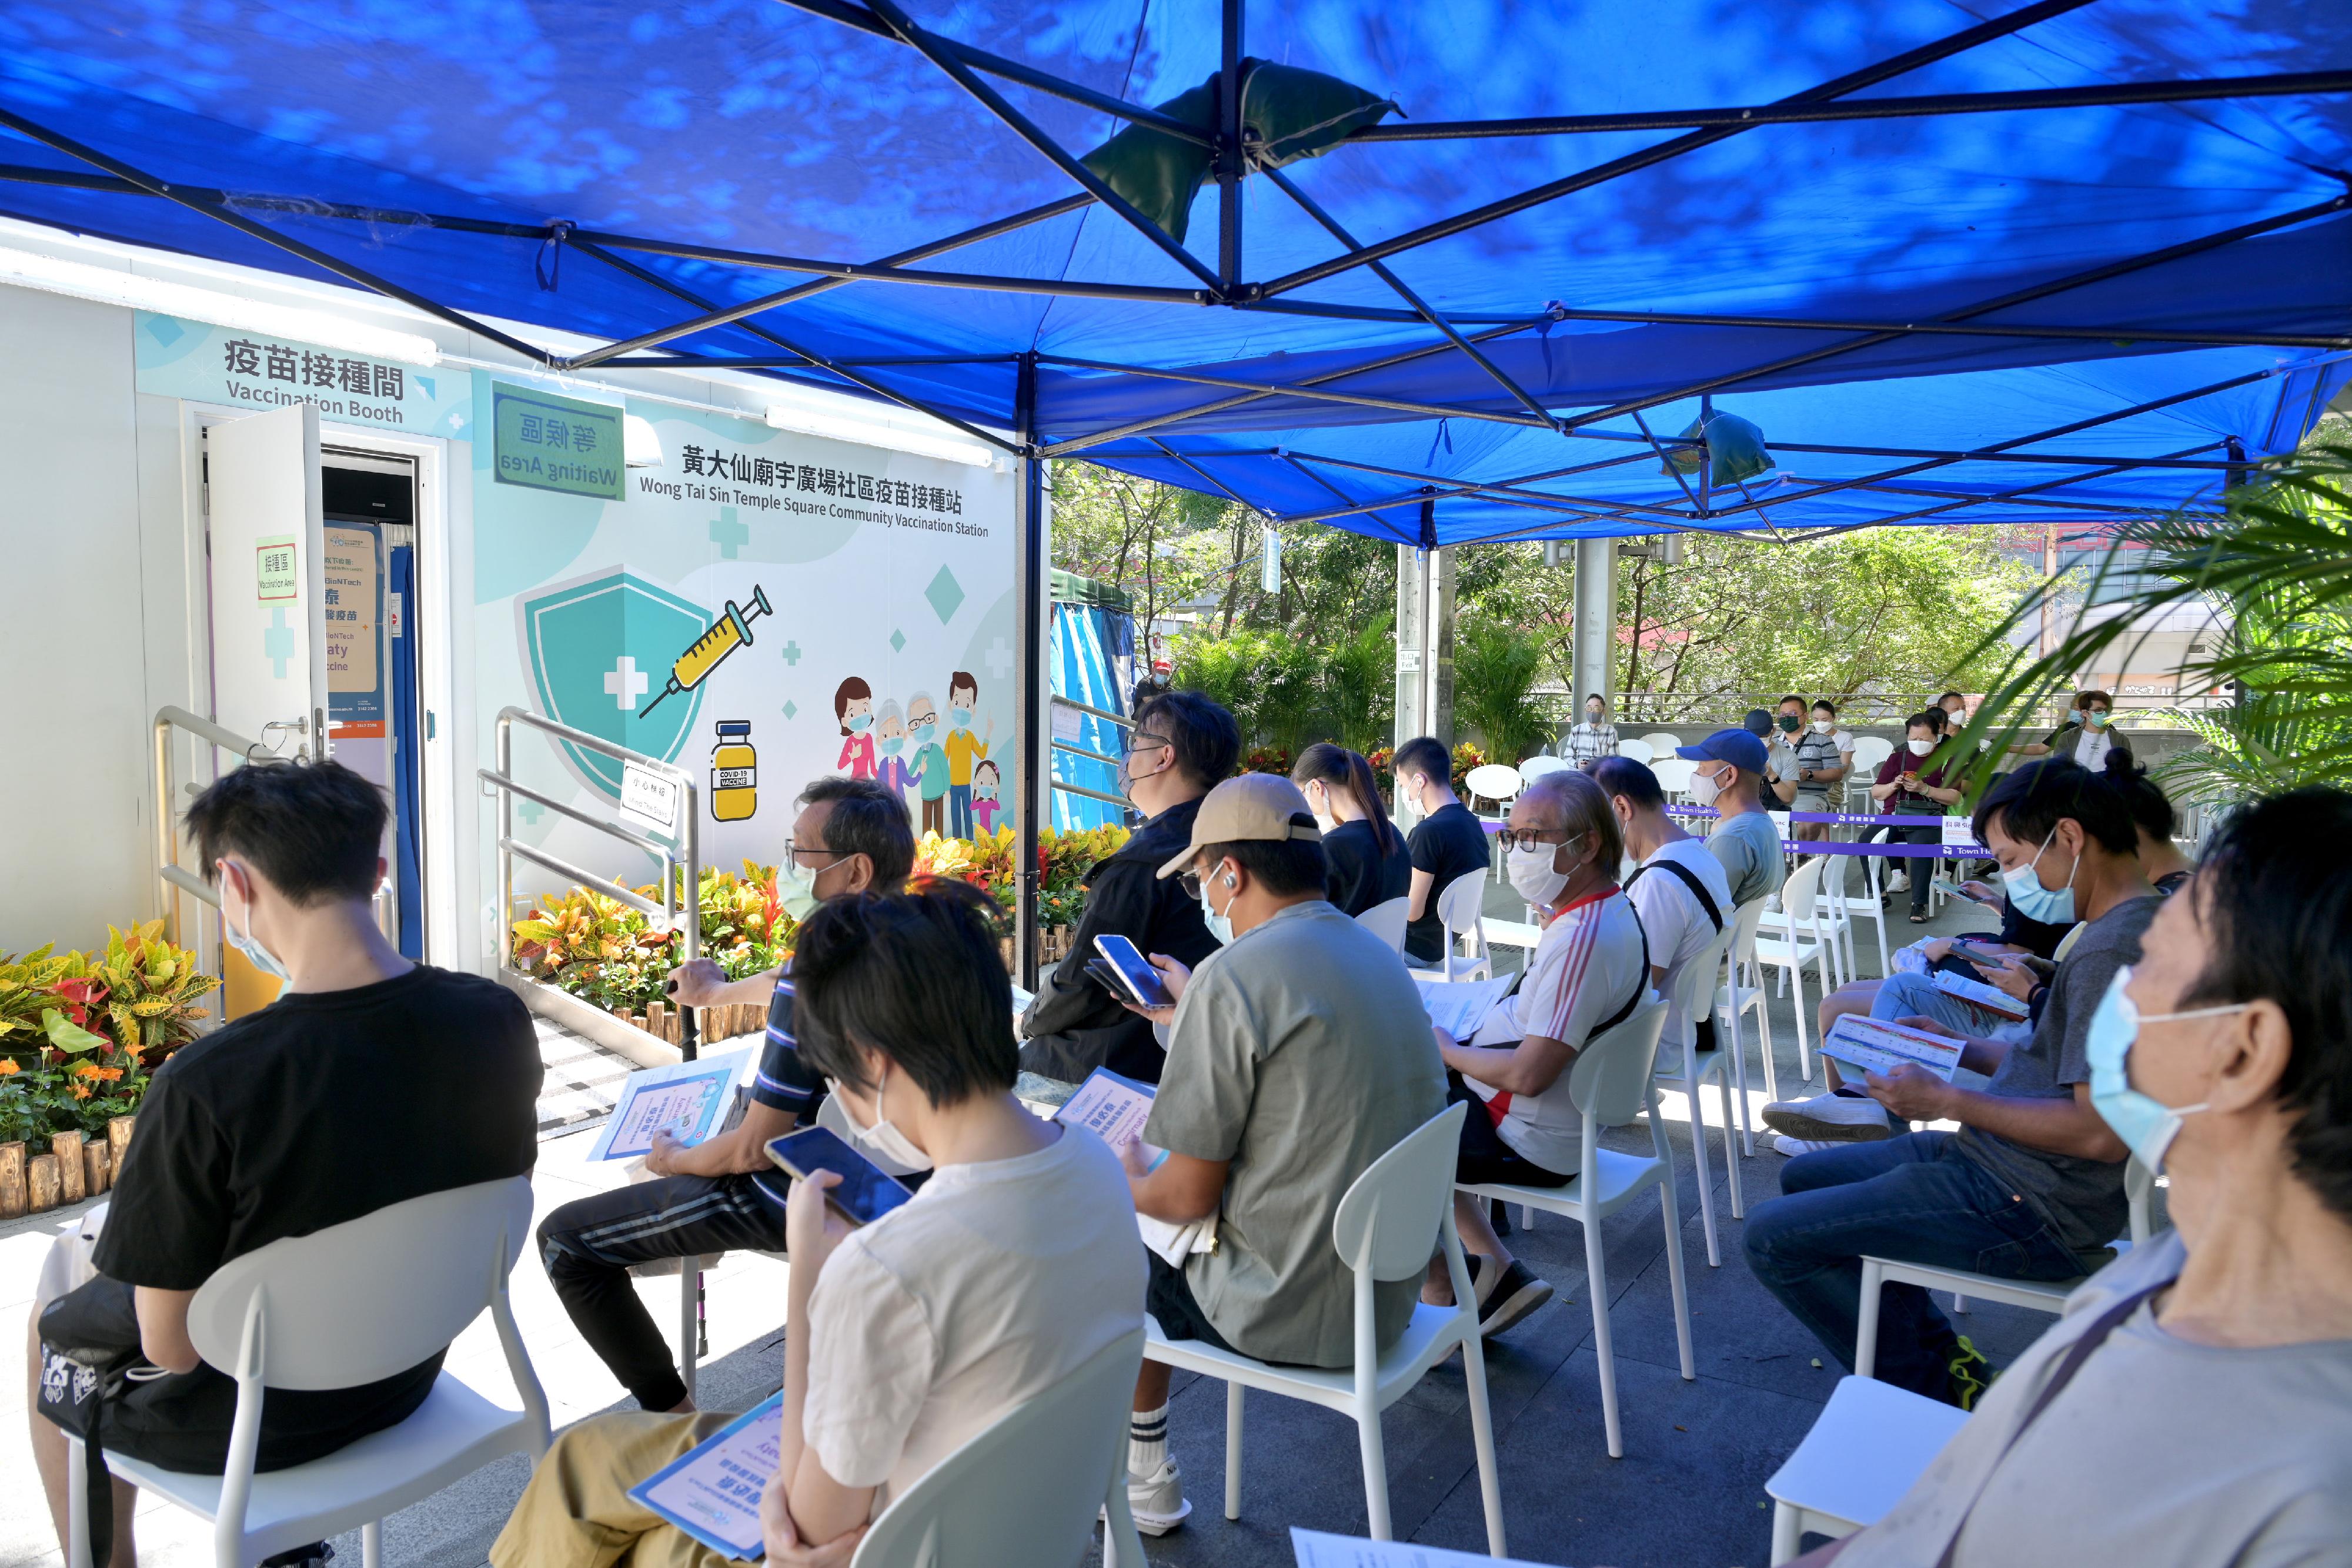 The Wong Tai Sin Temple Square Community Vaccination Station (CVS) started providing service for the public today (October 12). Photo shows members of the public waiting for their COVID-19 vaccination at the CVS.